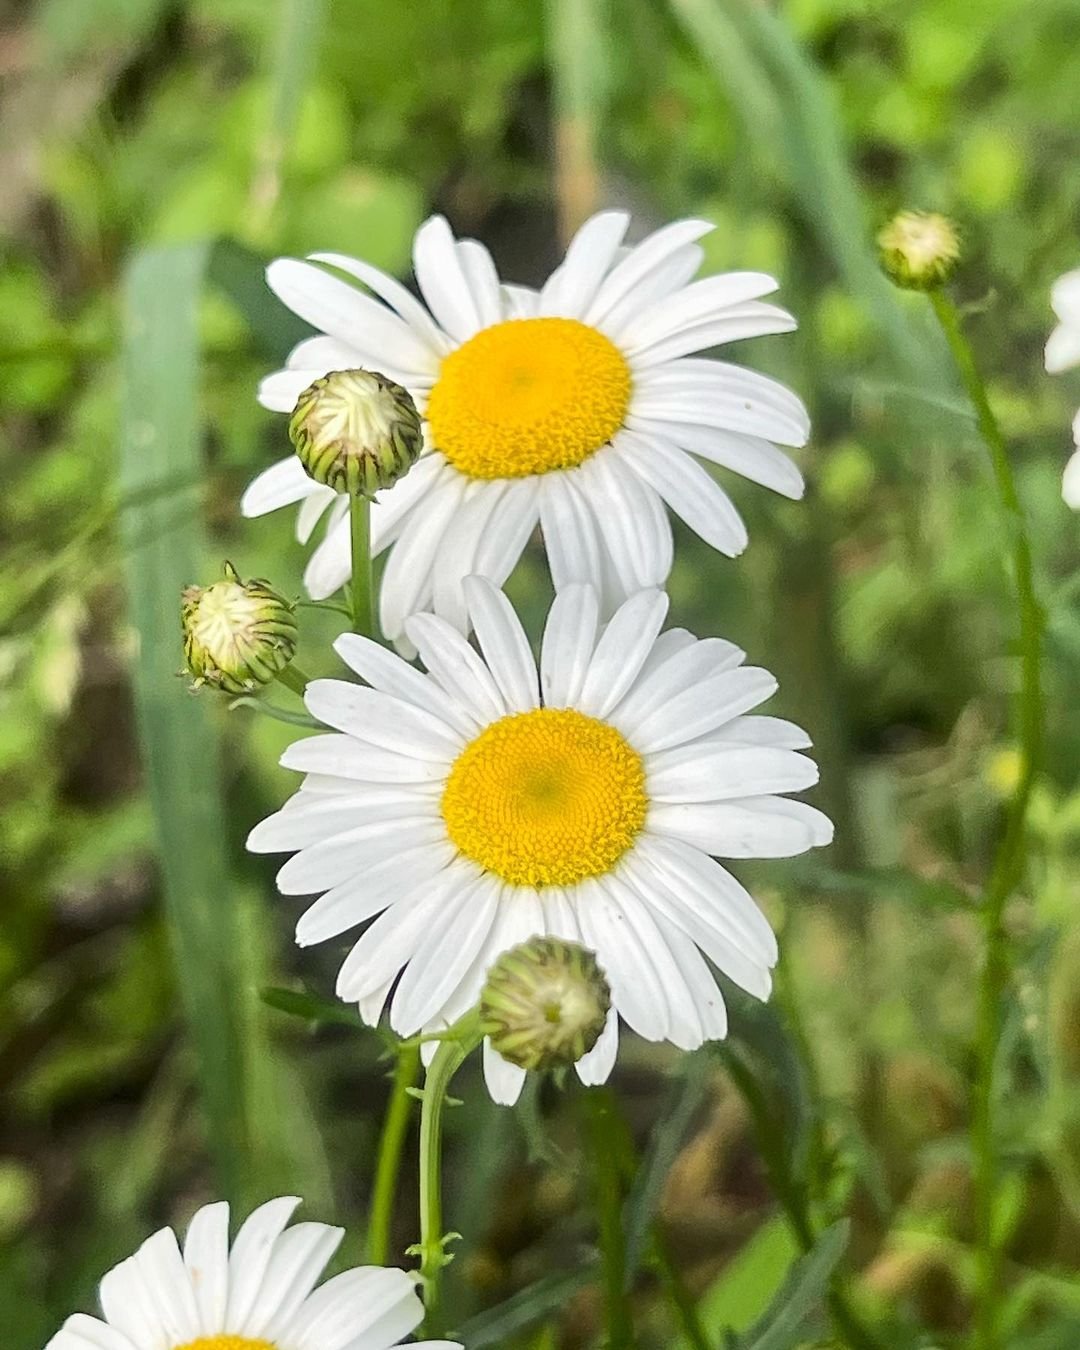  White Oxeye Daisies with yellow centers blooming in the grass.